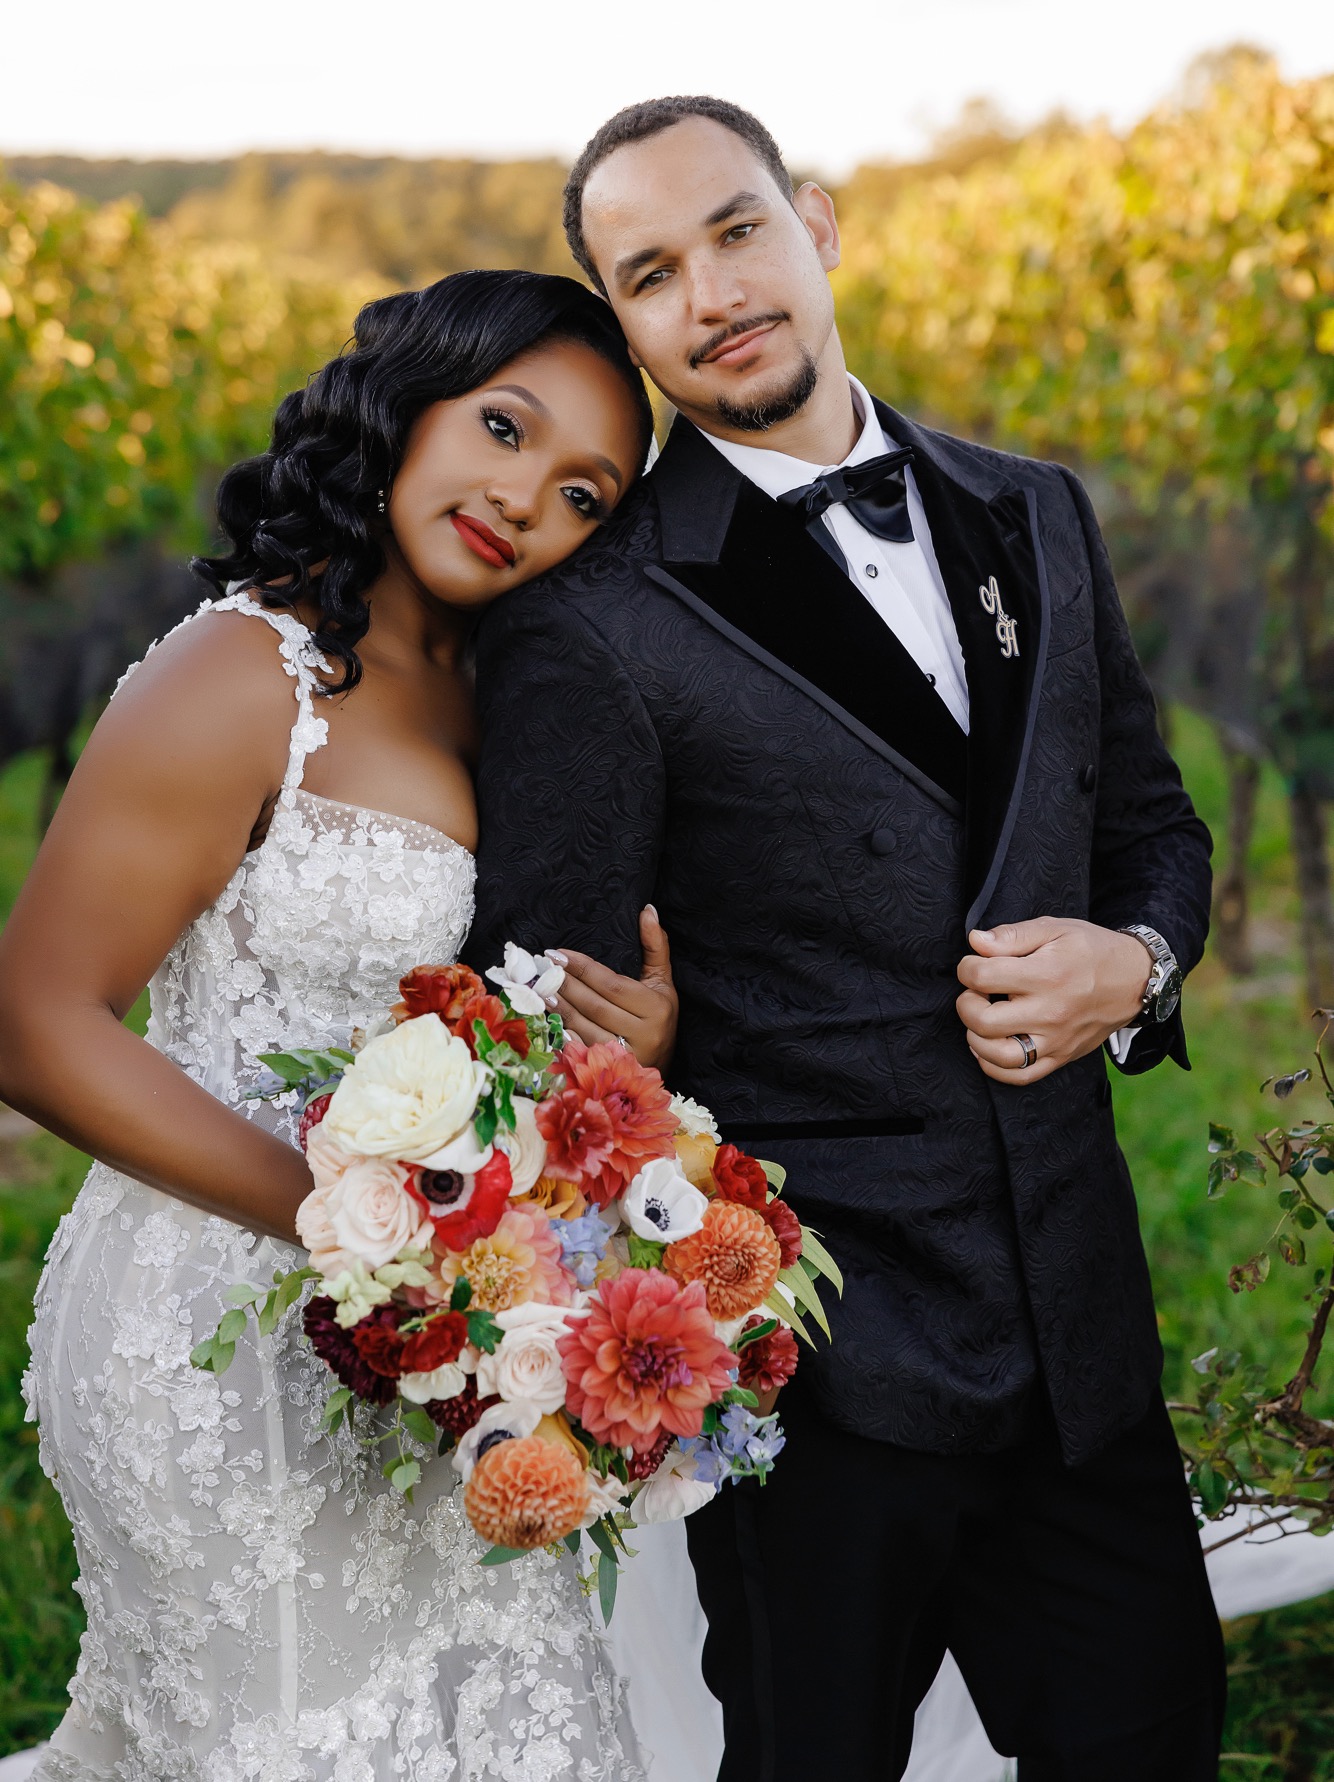 Rich Colors and Lush Flowers Filled This Summer-Meets-Fall Wedding